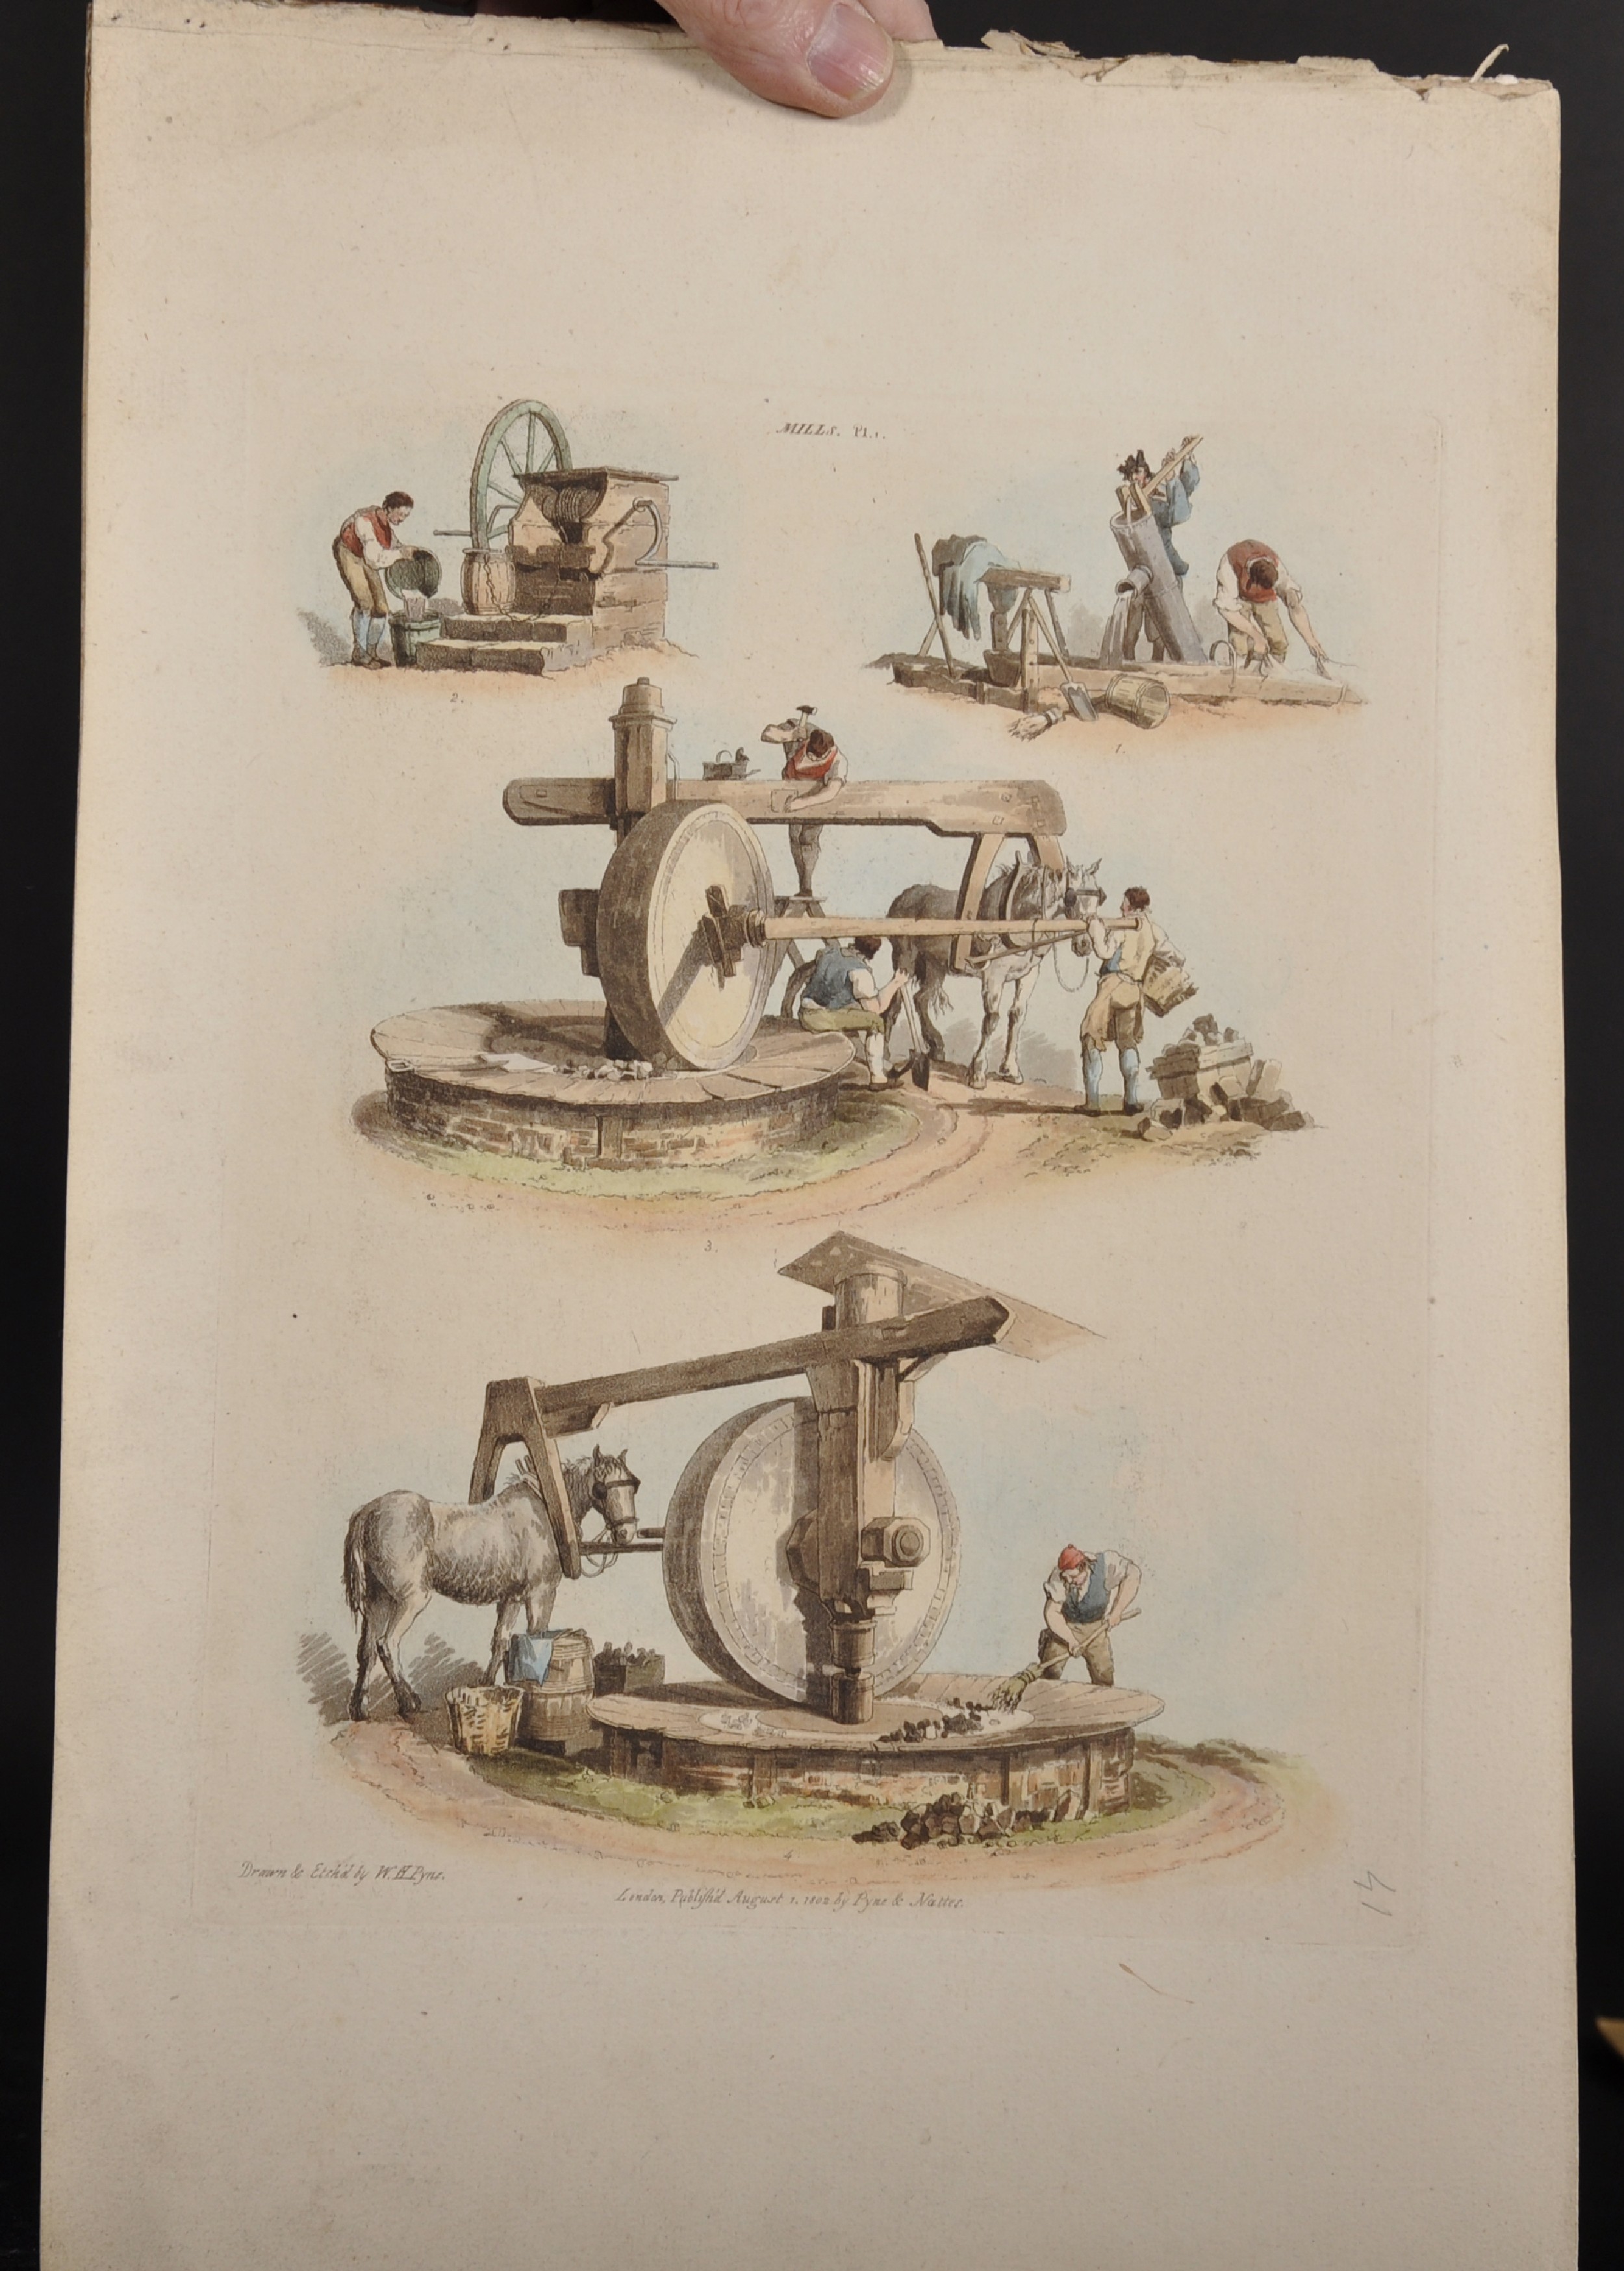 After William Henry Pyne (1769-1843) British. "Mills" Plate 1, Engraving, Unframed, 11.5" x 9", - Image 2 of 6